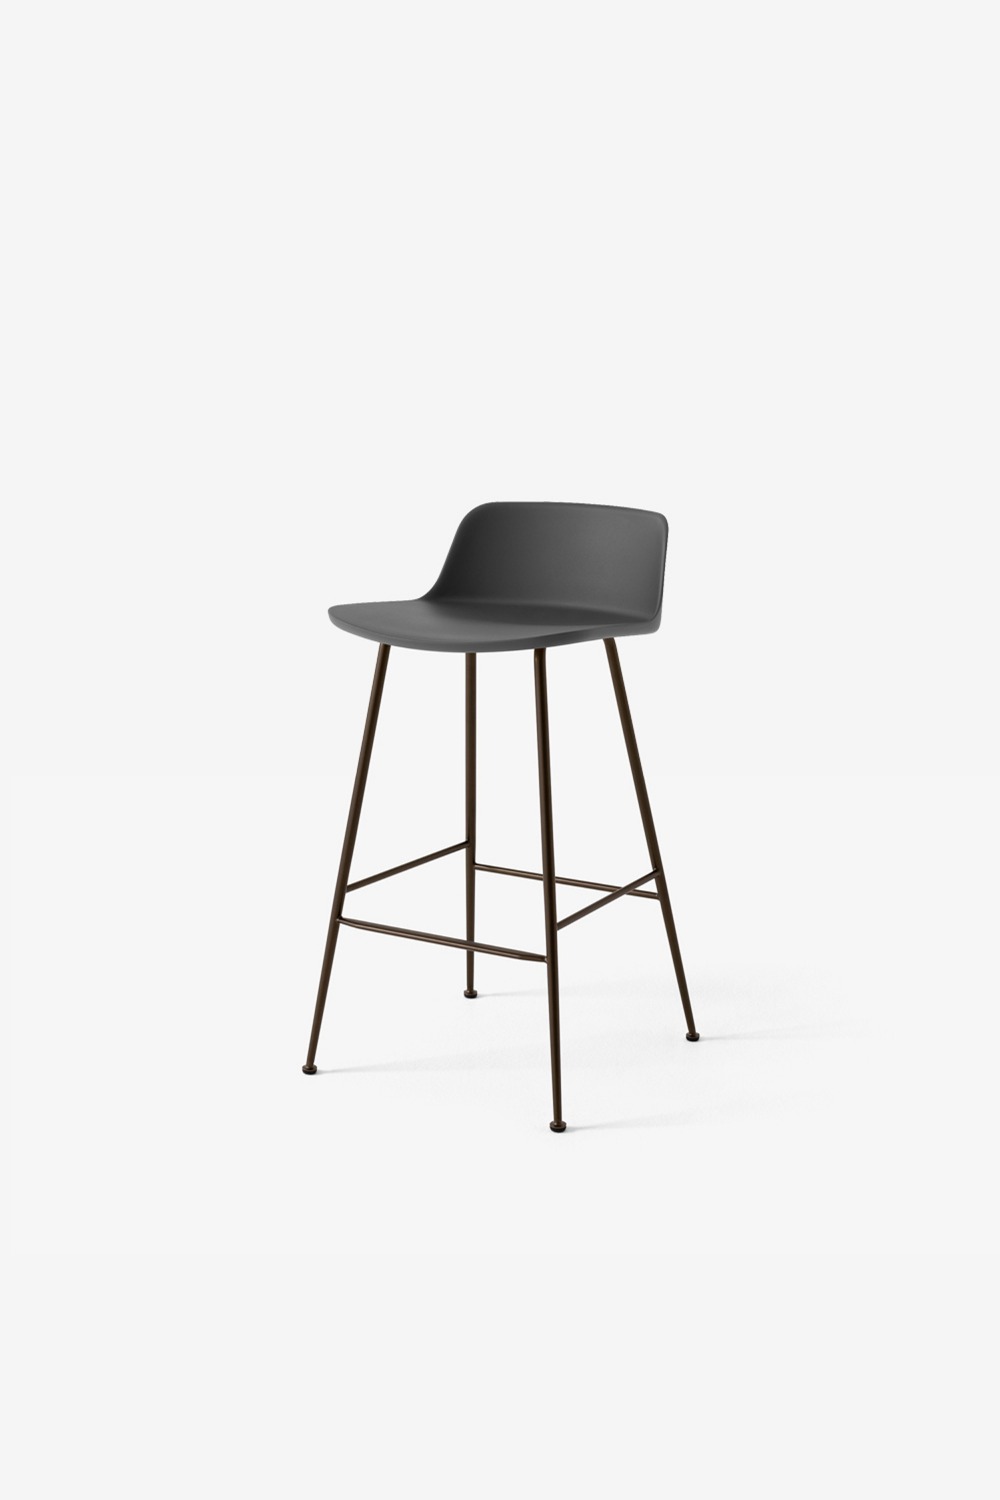 [&amp;Tradition] Rely Counter stool / HW81 (Stone grey)